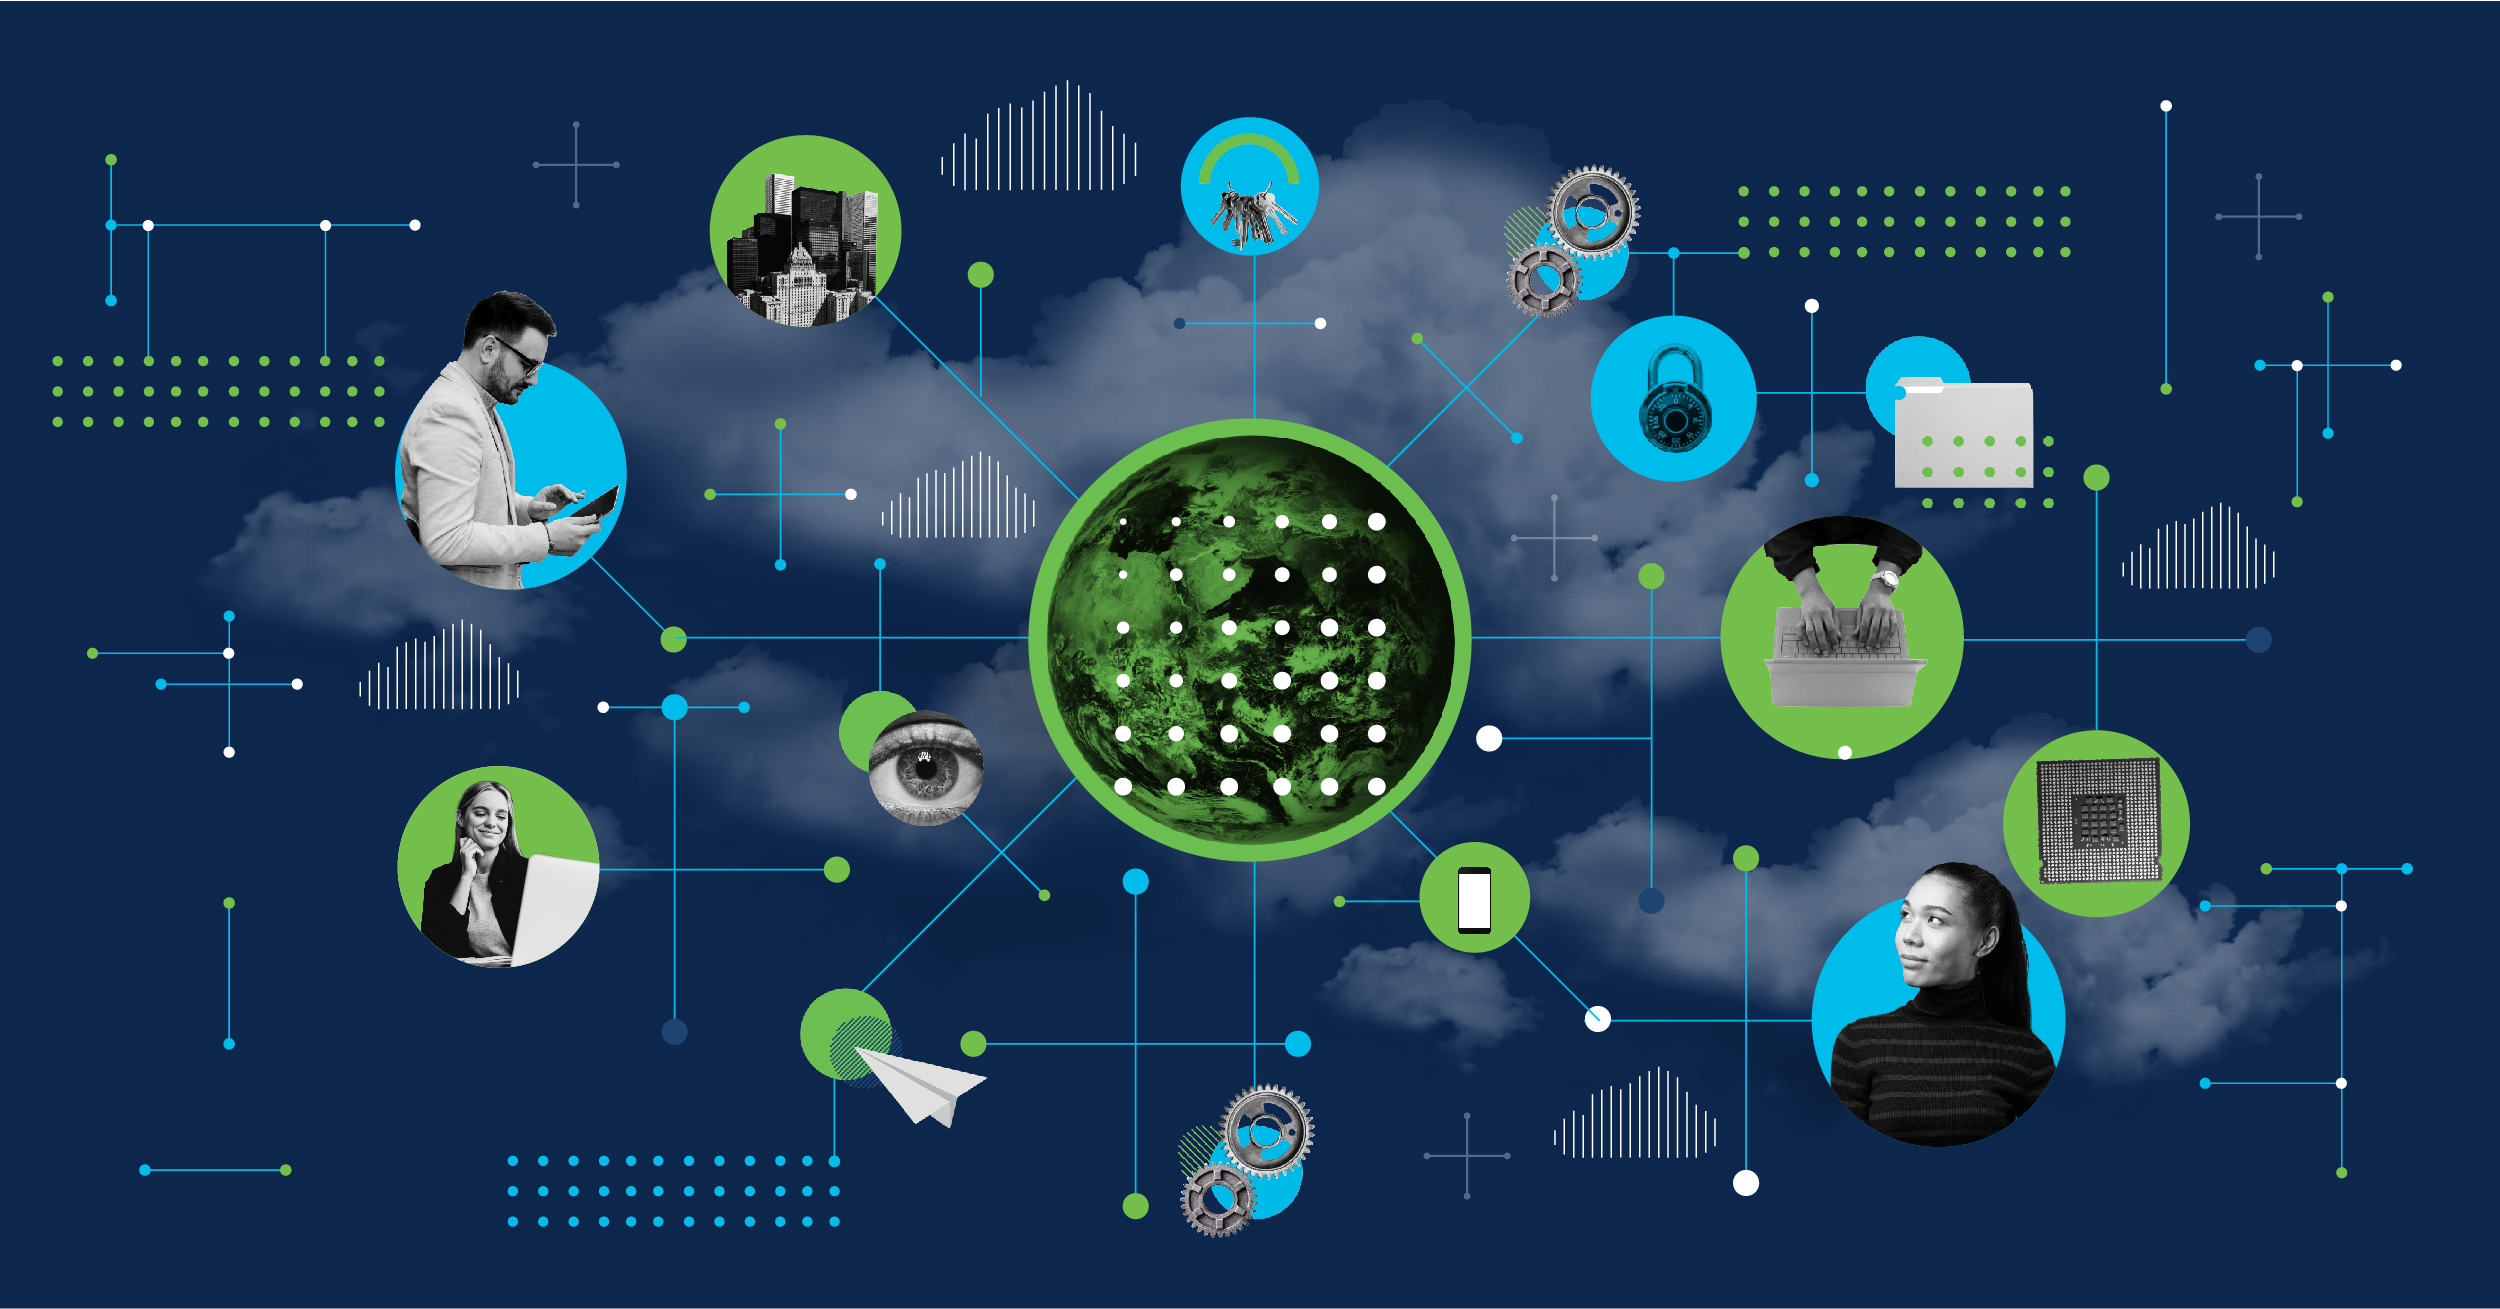 Cisco Secure Cloud Insights is your Eye in the Sky